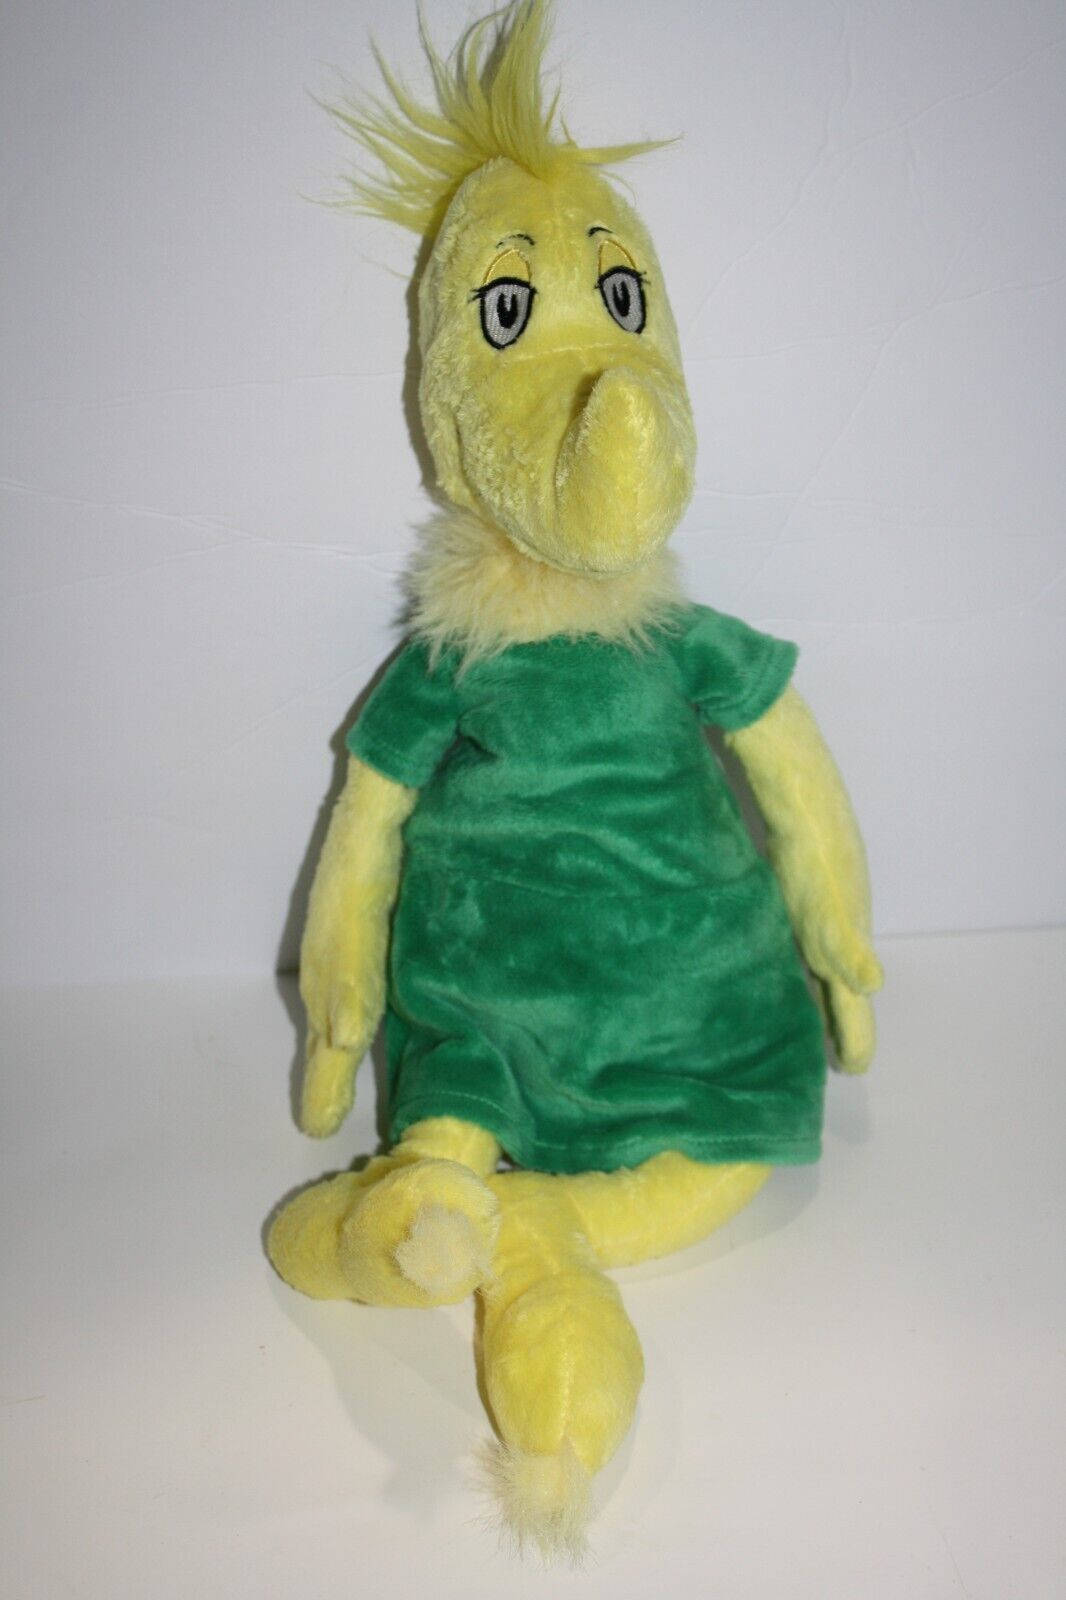 Primary image for Dr Seuss Yellow Bird Sneetch Green Dress Plush Stuffed Animal Toy Kohls Cares